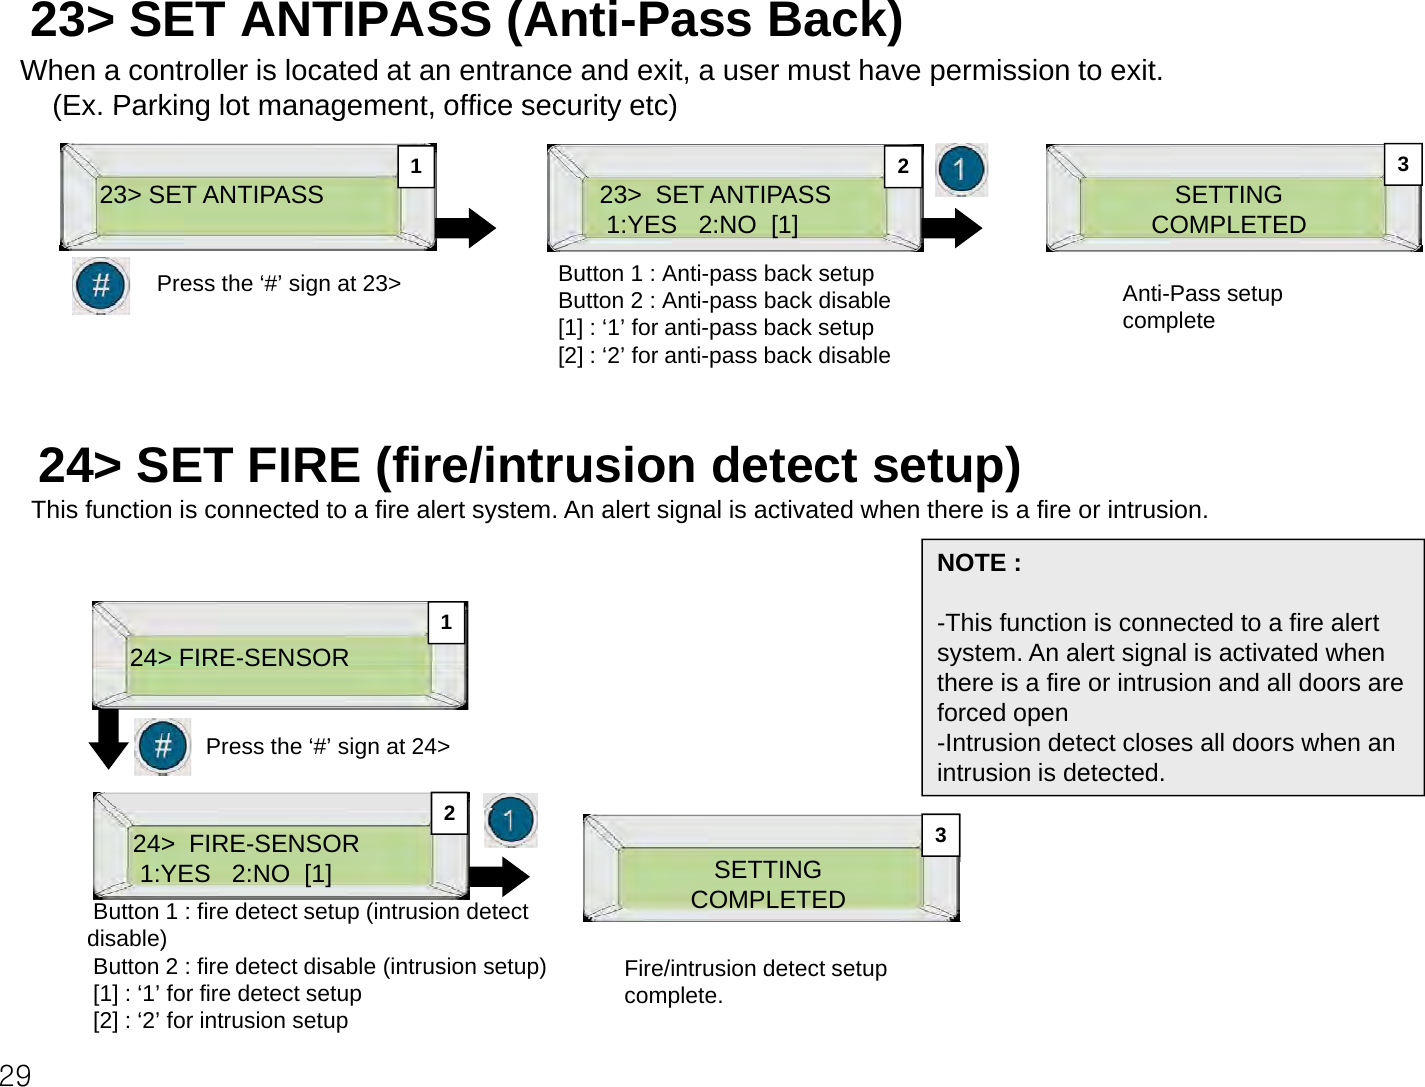 23&gt; SET ANTIPASS (Anti-Pass Back)When a controller is located at an entrance and exit, a user must have permission to exit.(Ex Parking lot management office security etc)(Ex. Parking lot management, office security etc) 23&gt; SET ANTIPASS 23&gt;  SET ANTIPASS1:YES   2:NO  [1]   SETTINGCOMPLETED1 2 3Button 1 : Anti-pass back setupButton 2 : Anti-pass back disable[1] : ‘1’ for anti-pass back setup[2] : ‘2’ for anti-pass back disablePress the ‘#’ sign at 23&gt; Anti-Pass setup complete24&gt; SET FIRE (fire/intrusion detect setup)This function is connected to a fire alert system. An alert signal is activated when there is a fire or intrusion. 24&gt; FIRE-SENSORNOTE :-This function is connected to a fire alert system. An alert signal is activated when 12there is a fire or intrusion and all doors are forced open-Intrusion detect closes all doors when an intrusion is detected.Press the ‘#’ sign at 24&gt;24&gt;  FIRE-SENSOR1:YES   2:NO  [1]  23SETTINGCOMPLETEDButton 1 : fire detect setup (intrusion detect disable)329Fire/intrusion detect setup complete.)Button 2 : fire detect disable (intrusion setup)[1] : ‘1’ for fire detect setup[2] : ‘2’ for intrusion setup